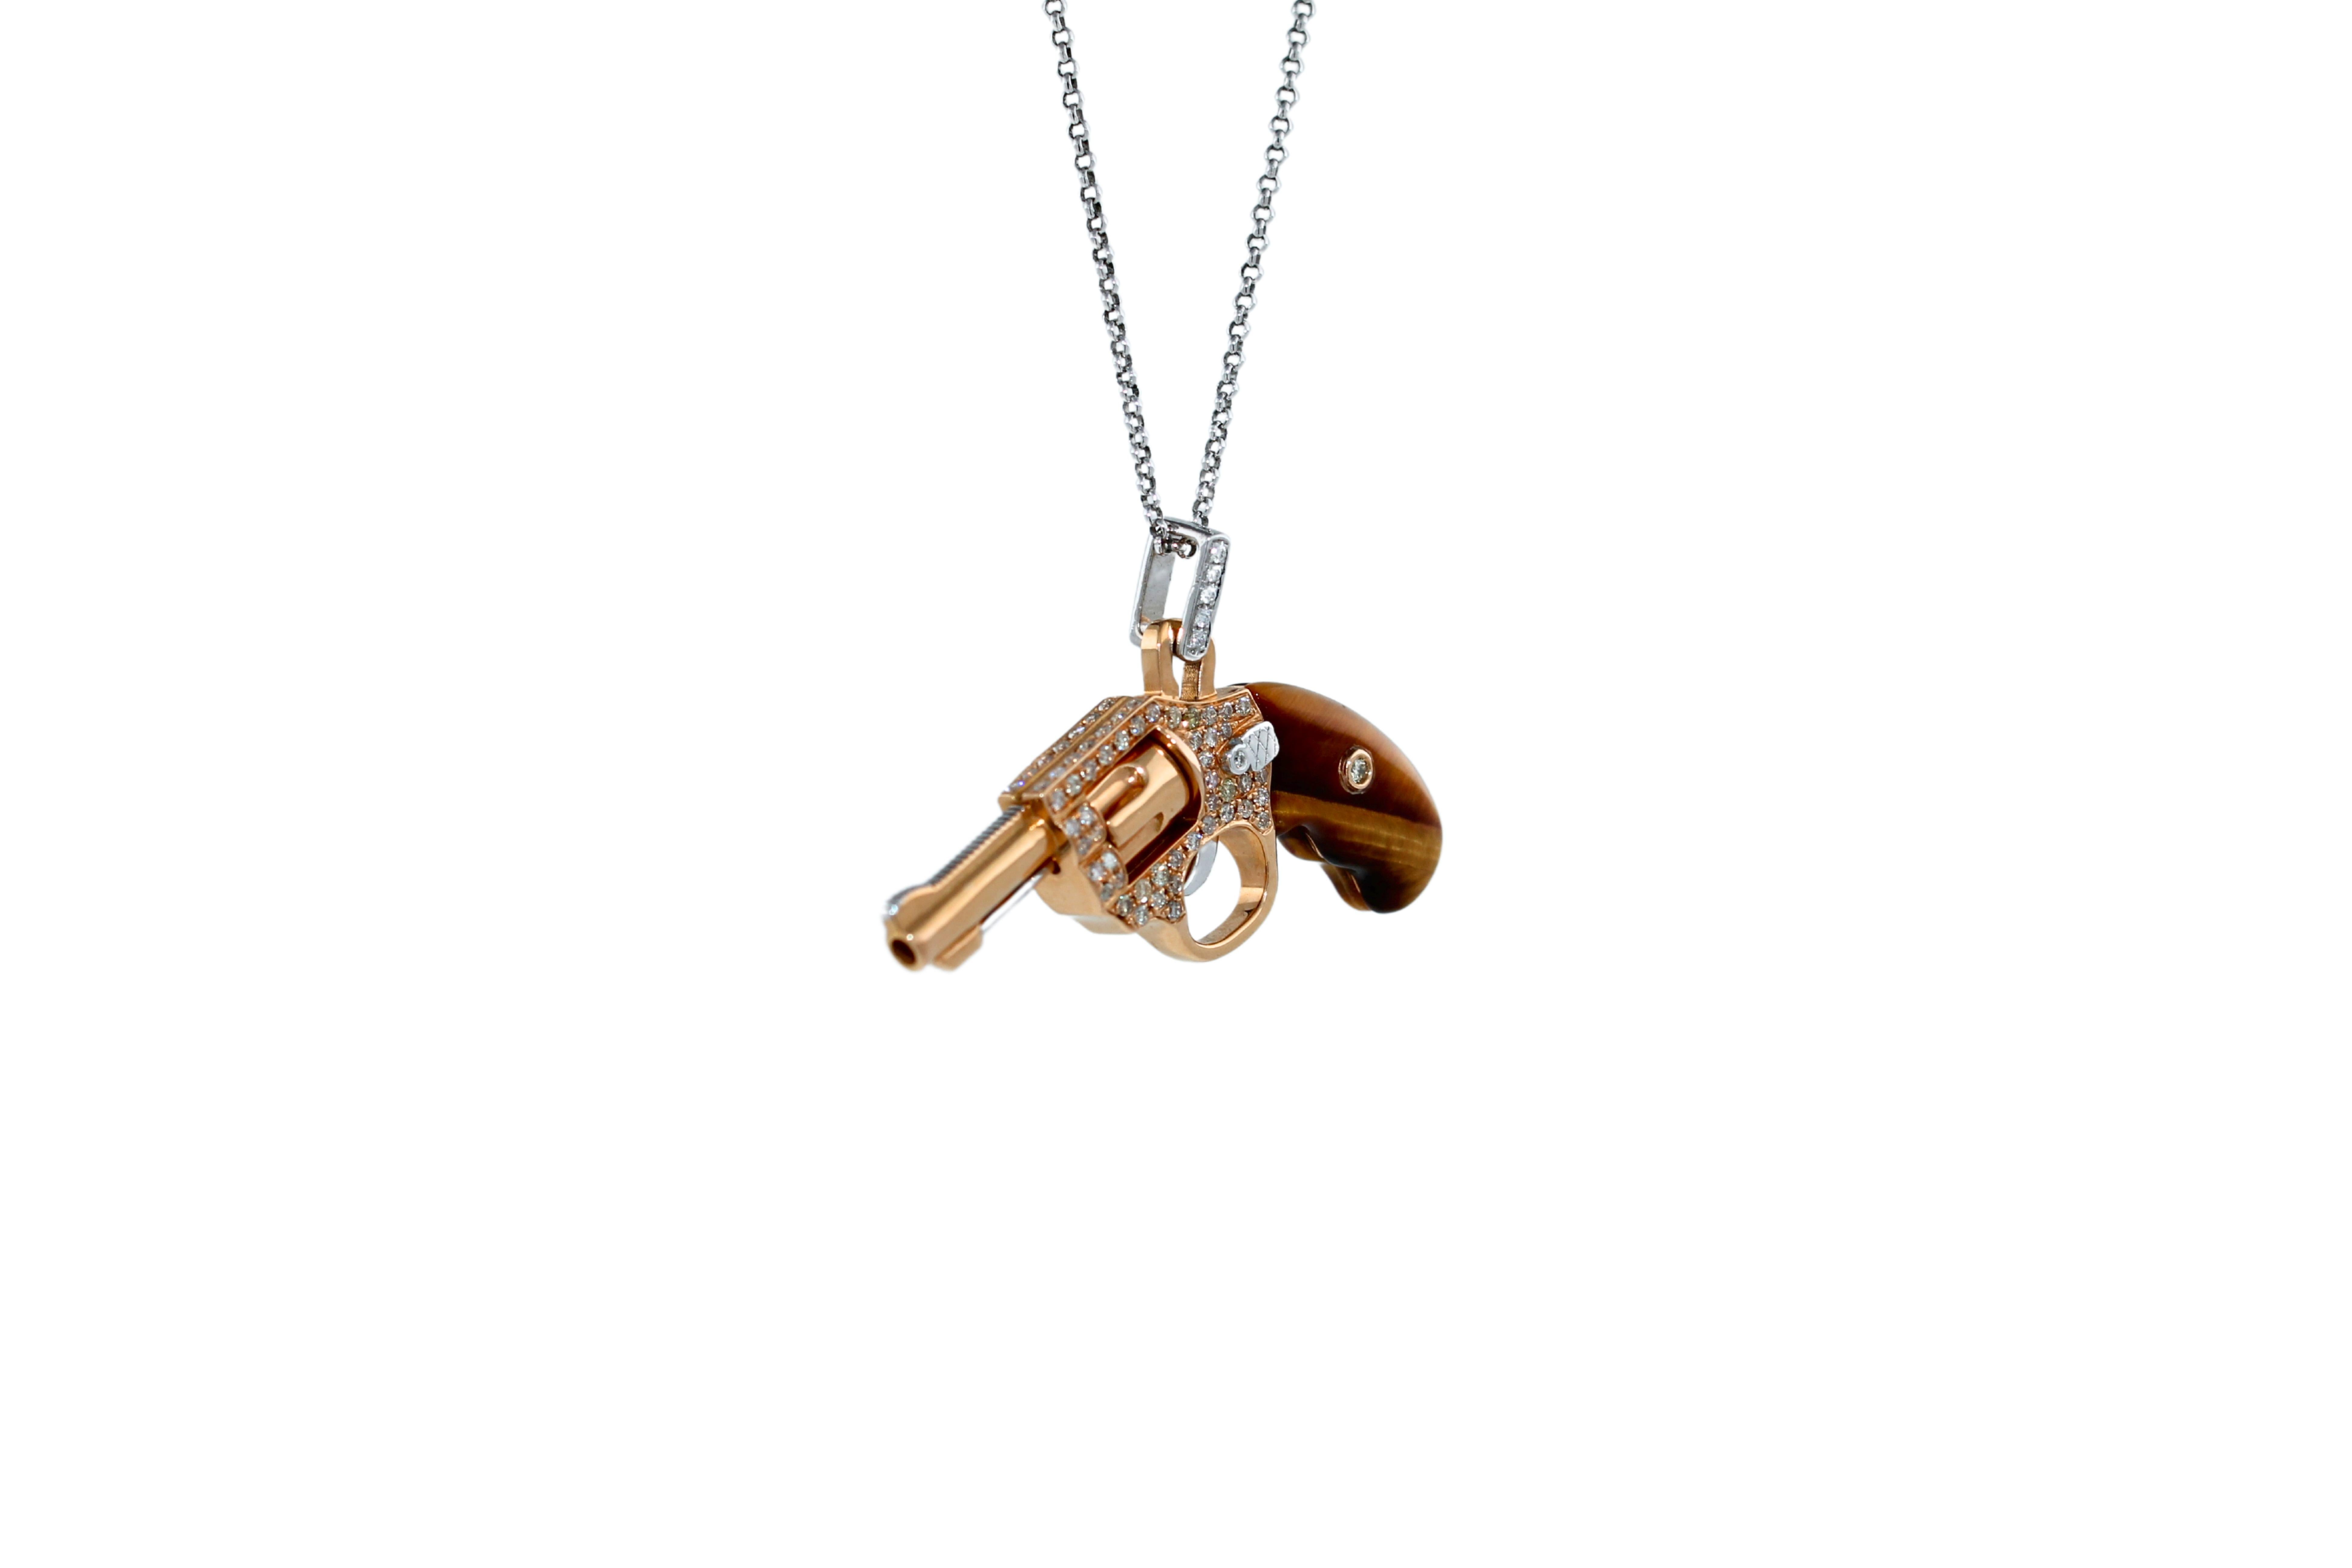 18 Karat Rose & White Gold
Genuine Tiger’s Eye Stone & Natural Diamonds 0.50 CTW
Approximate Mini Peacemaker Length: 1.3” inches / 3.3 centimeters
Approximate Chain Length: Adjustable 16,17,18 inches